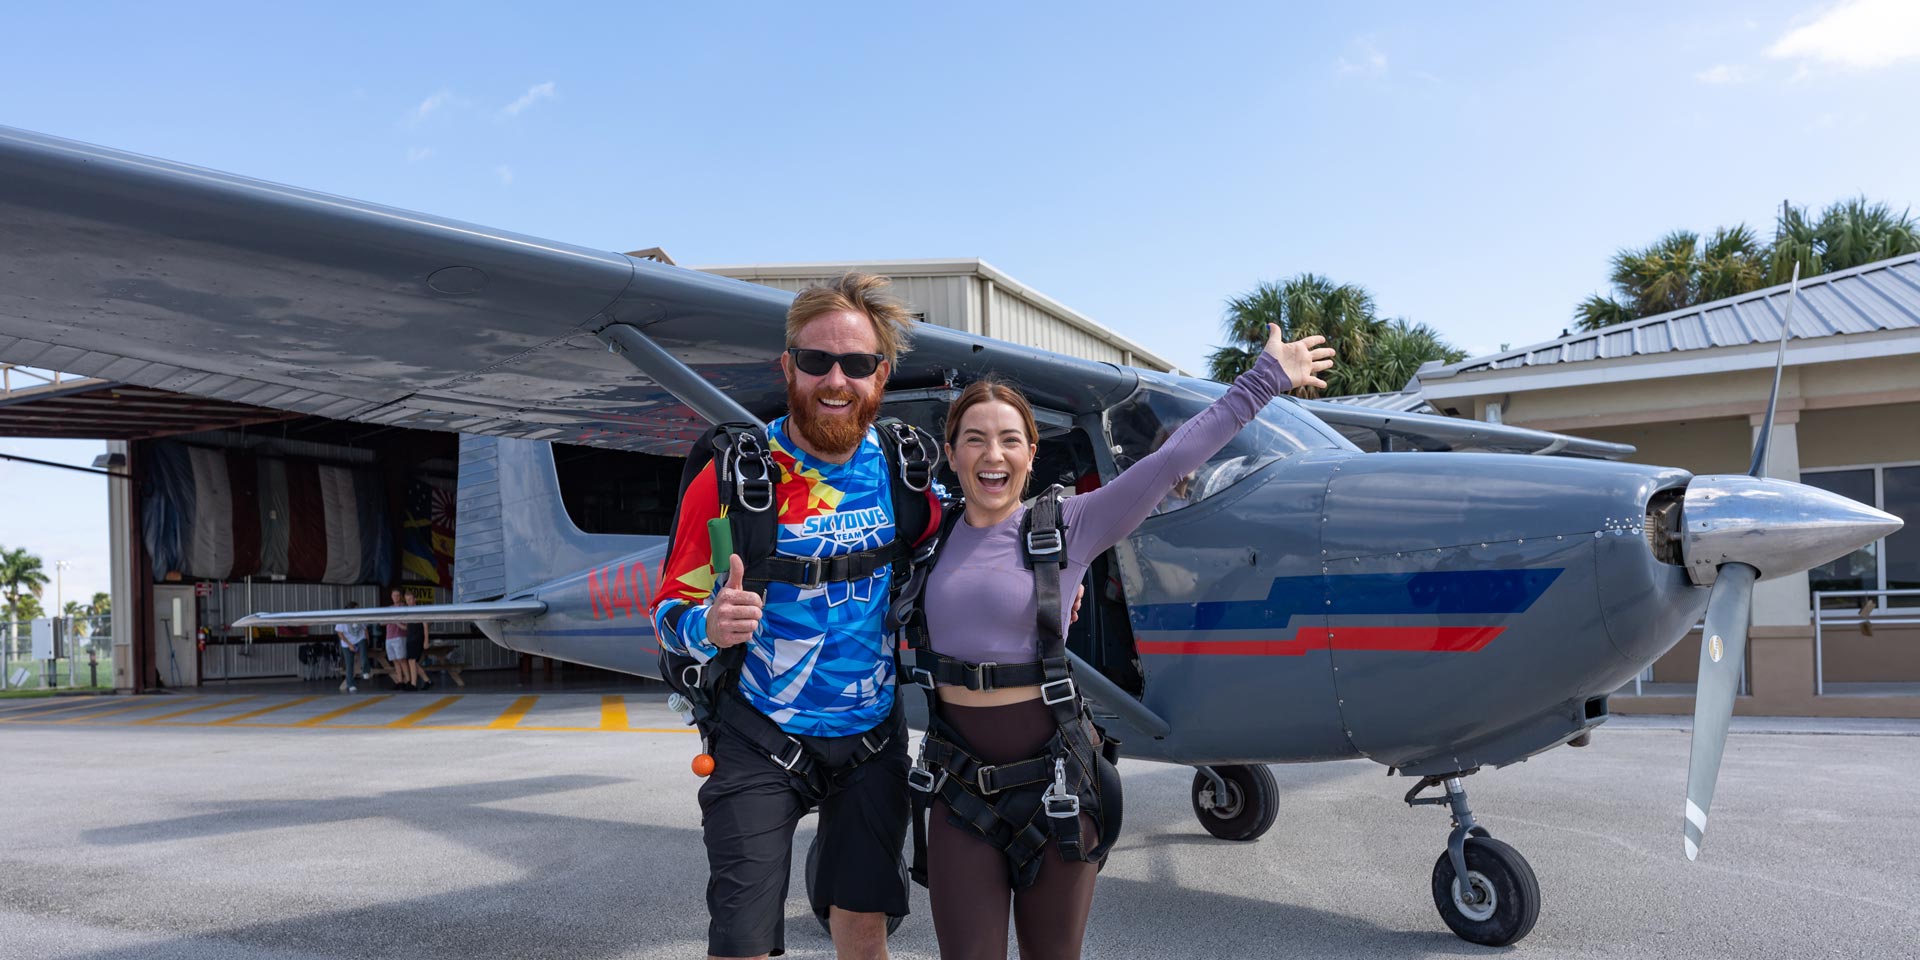 Tandem skydiving instructor and student smile for a photo in front of a skydiving plane at Skydive Palm Beach